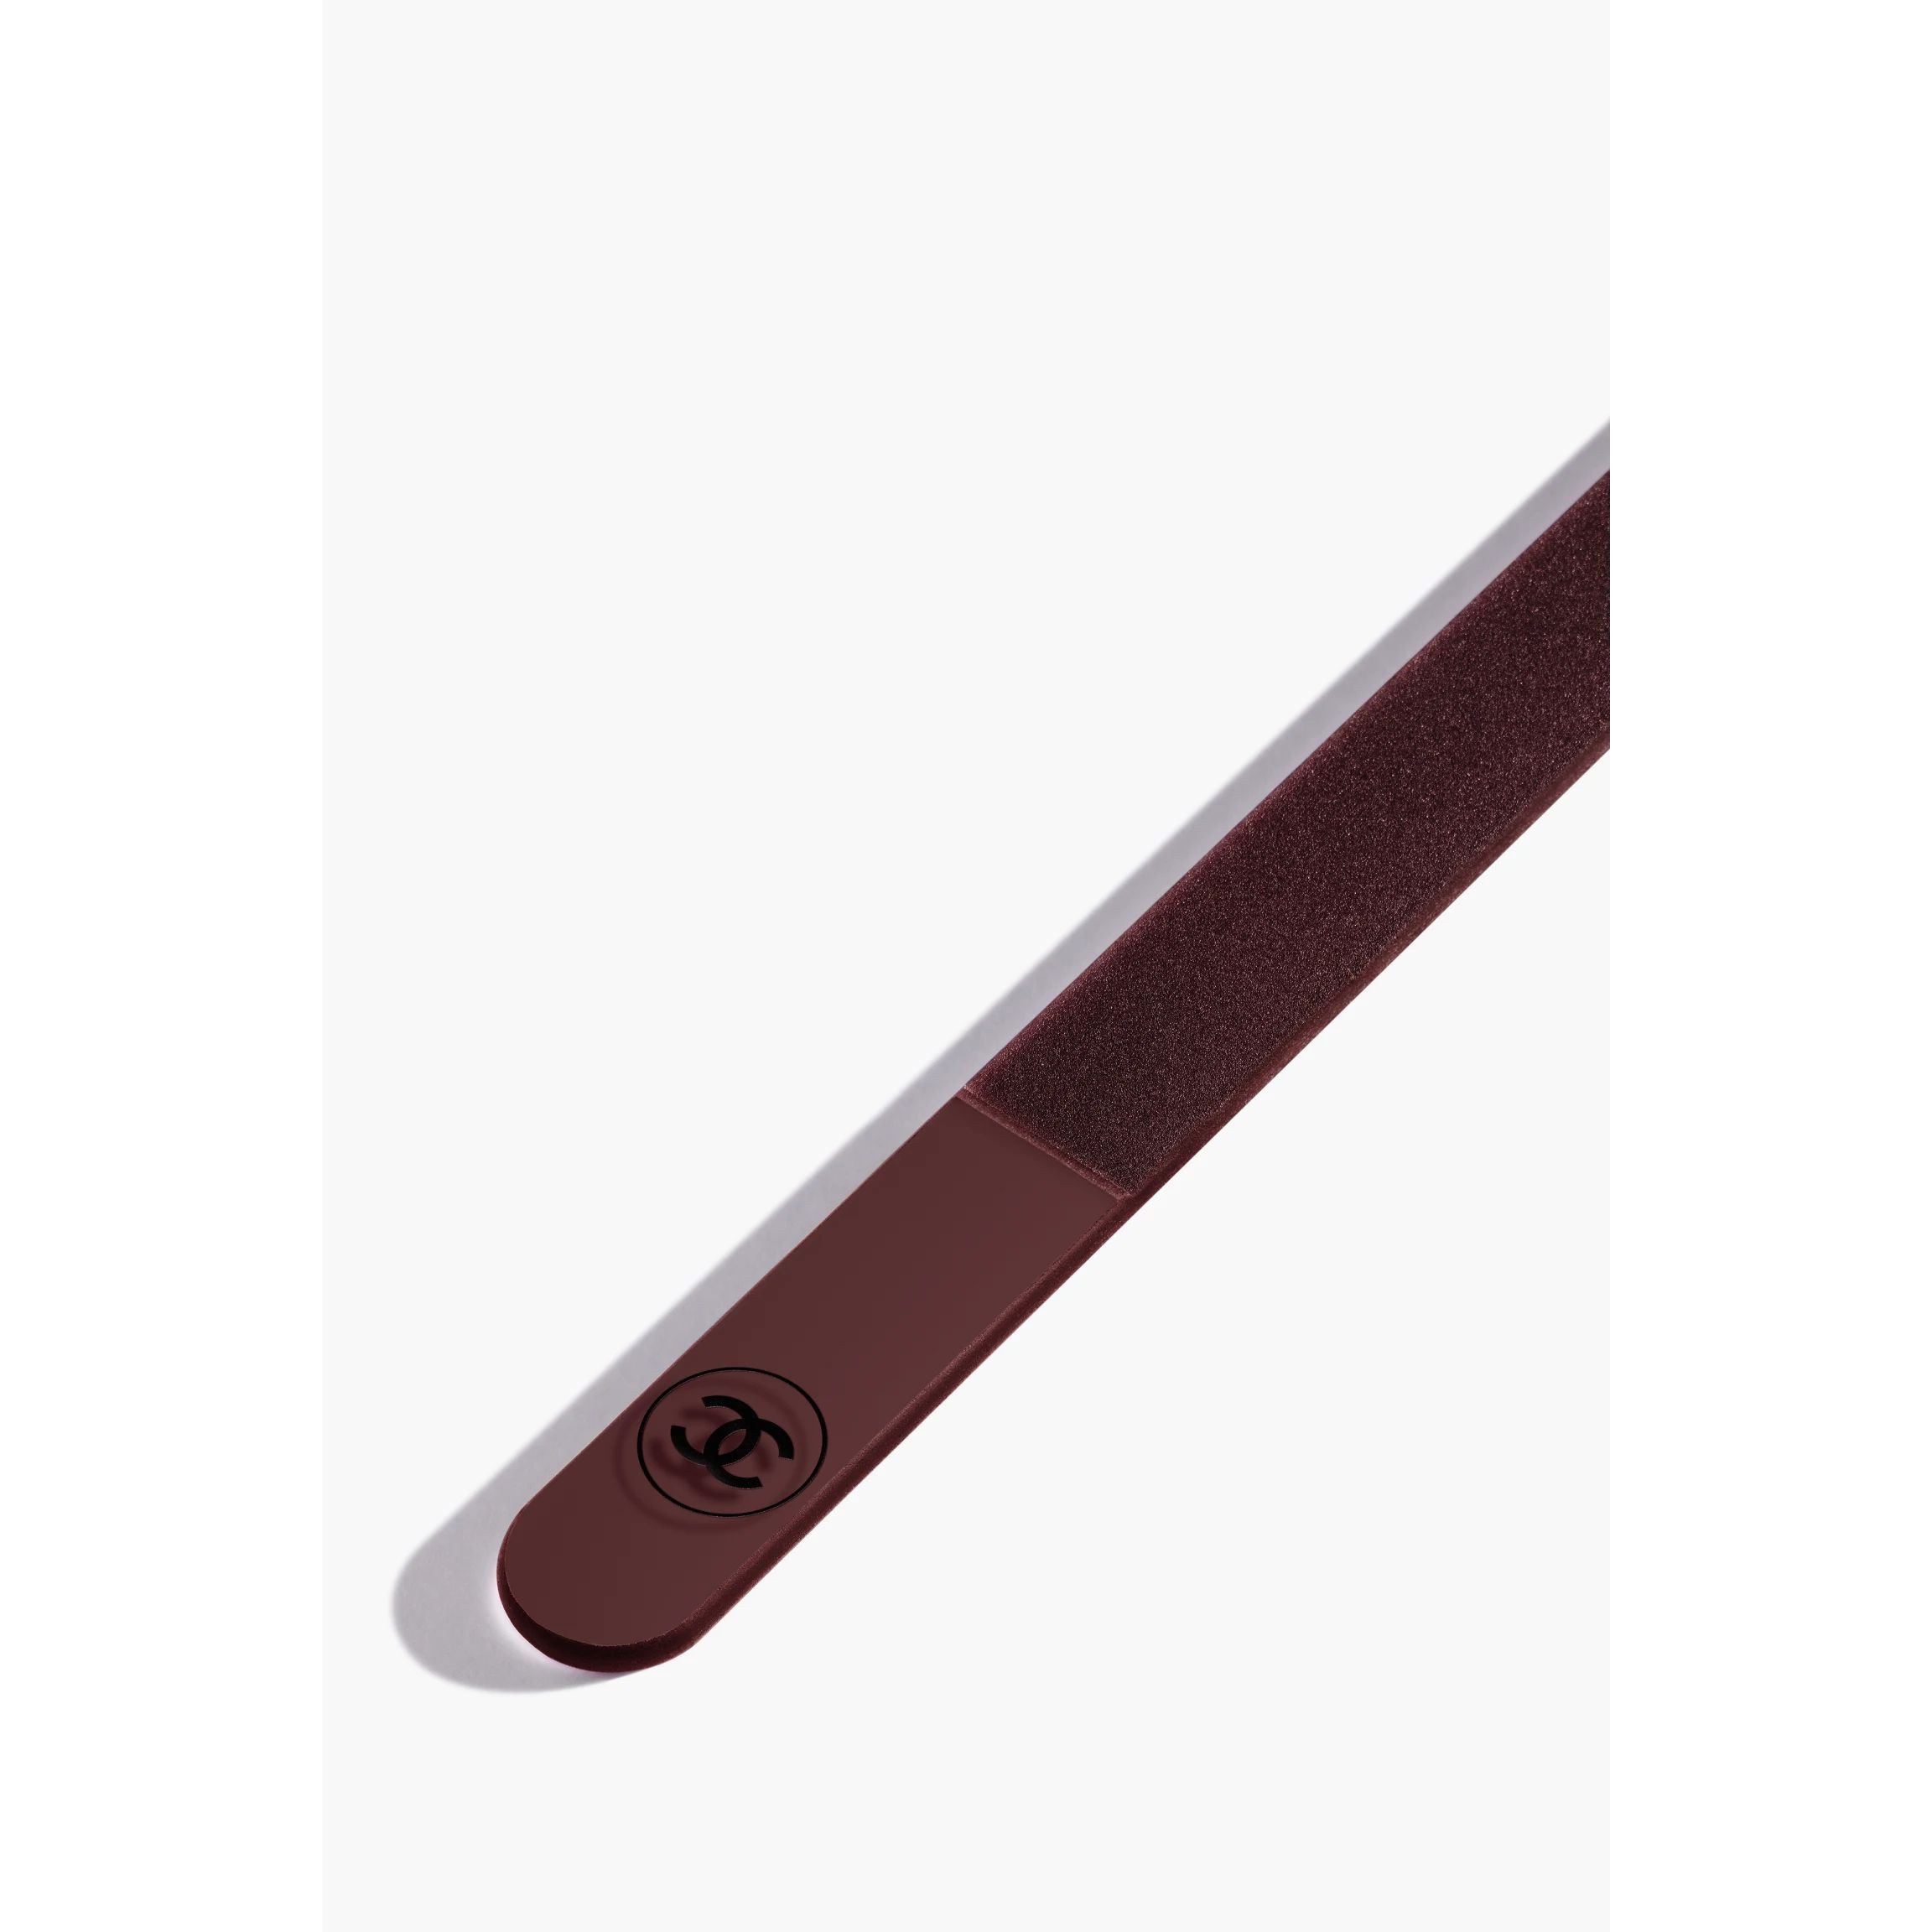 Limited-Edition Nail File | Chanel, Inc. (US)